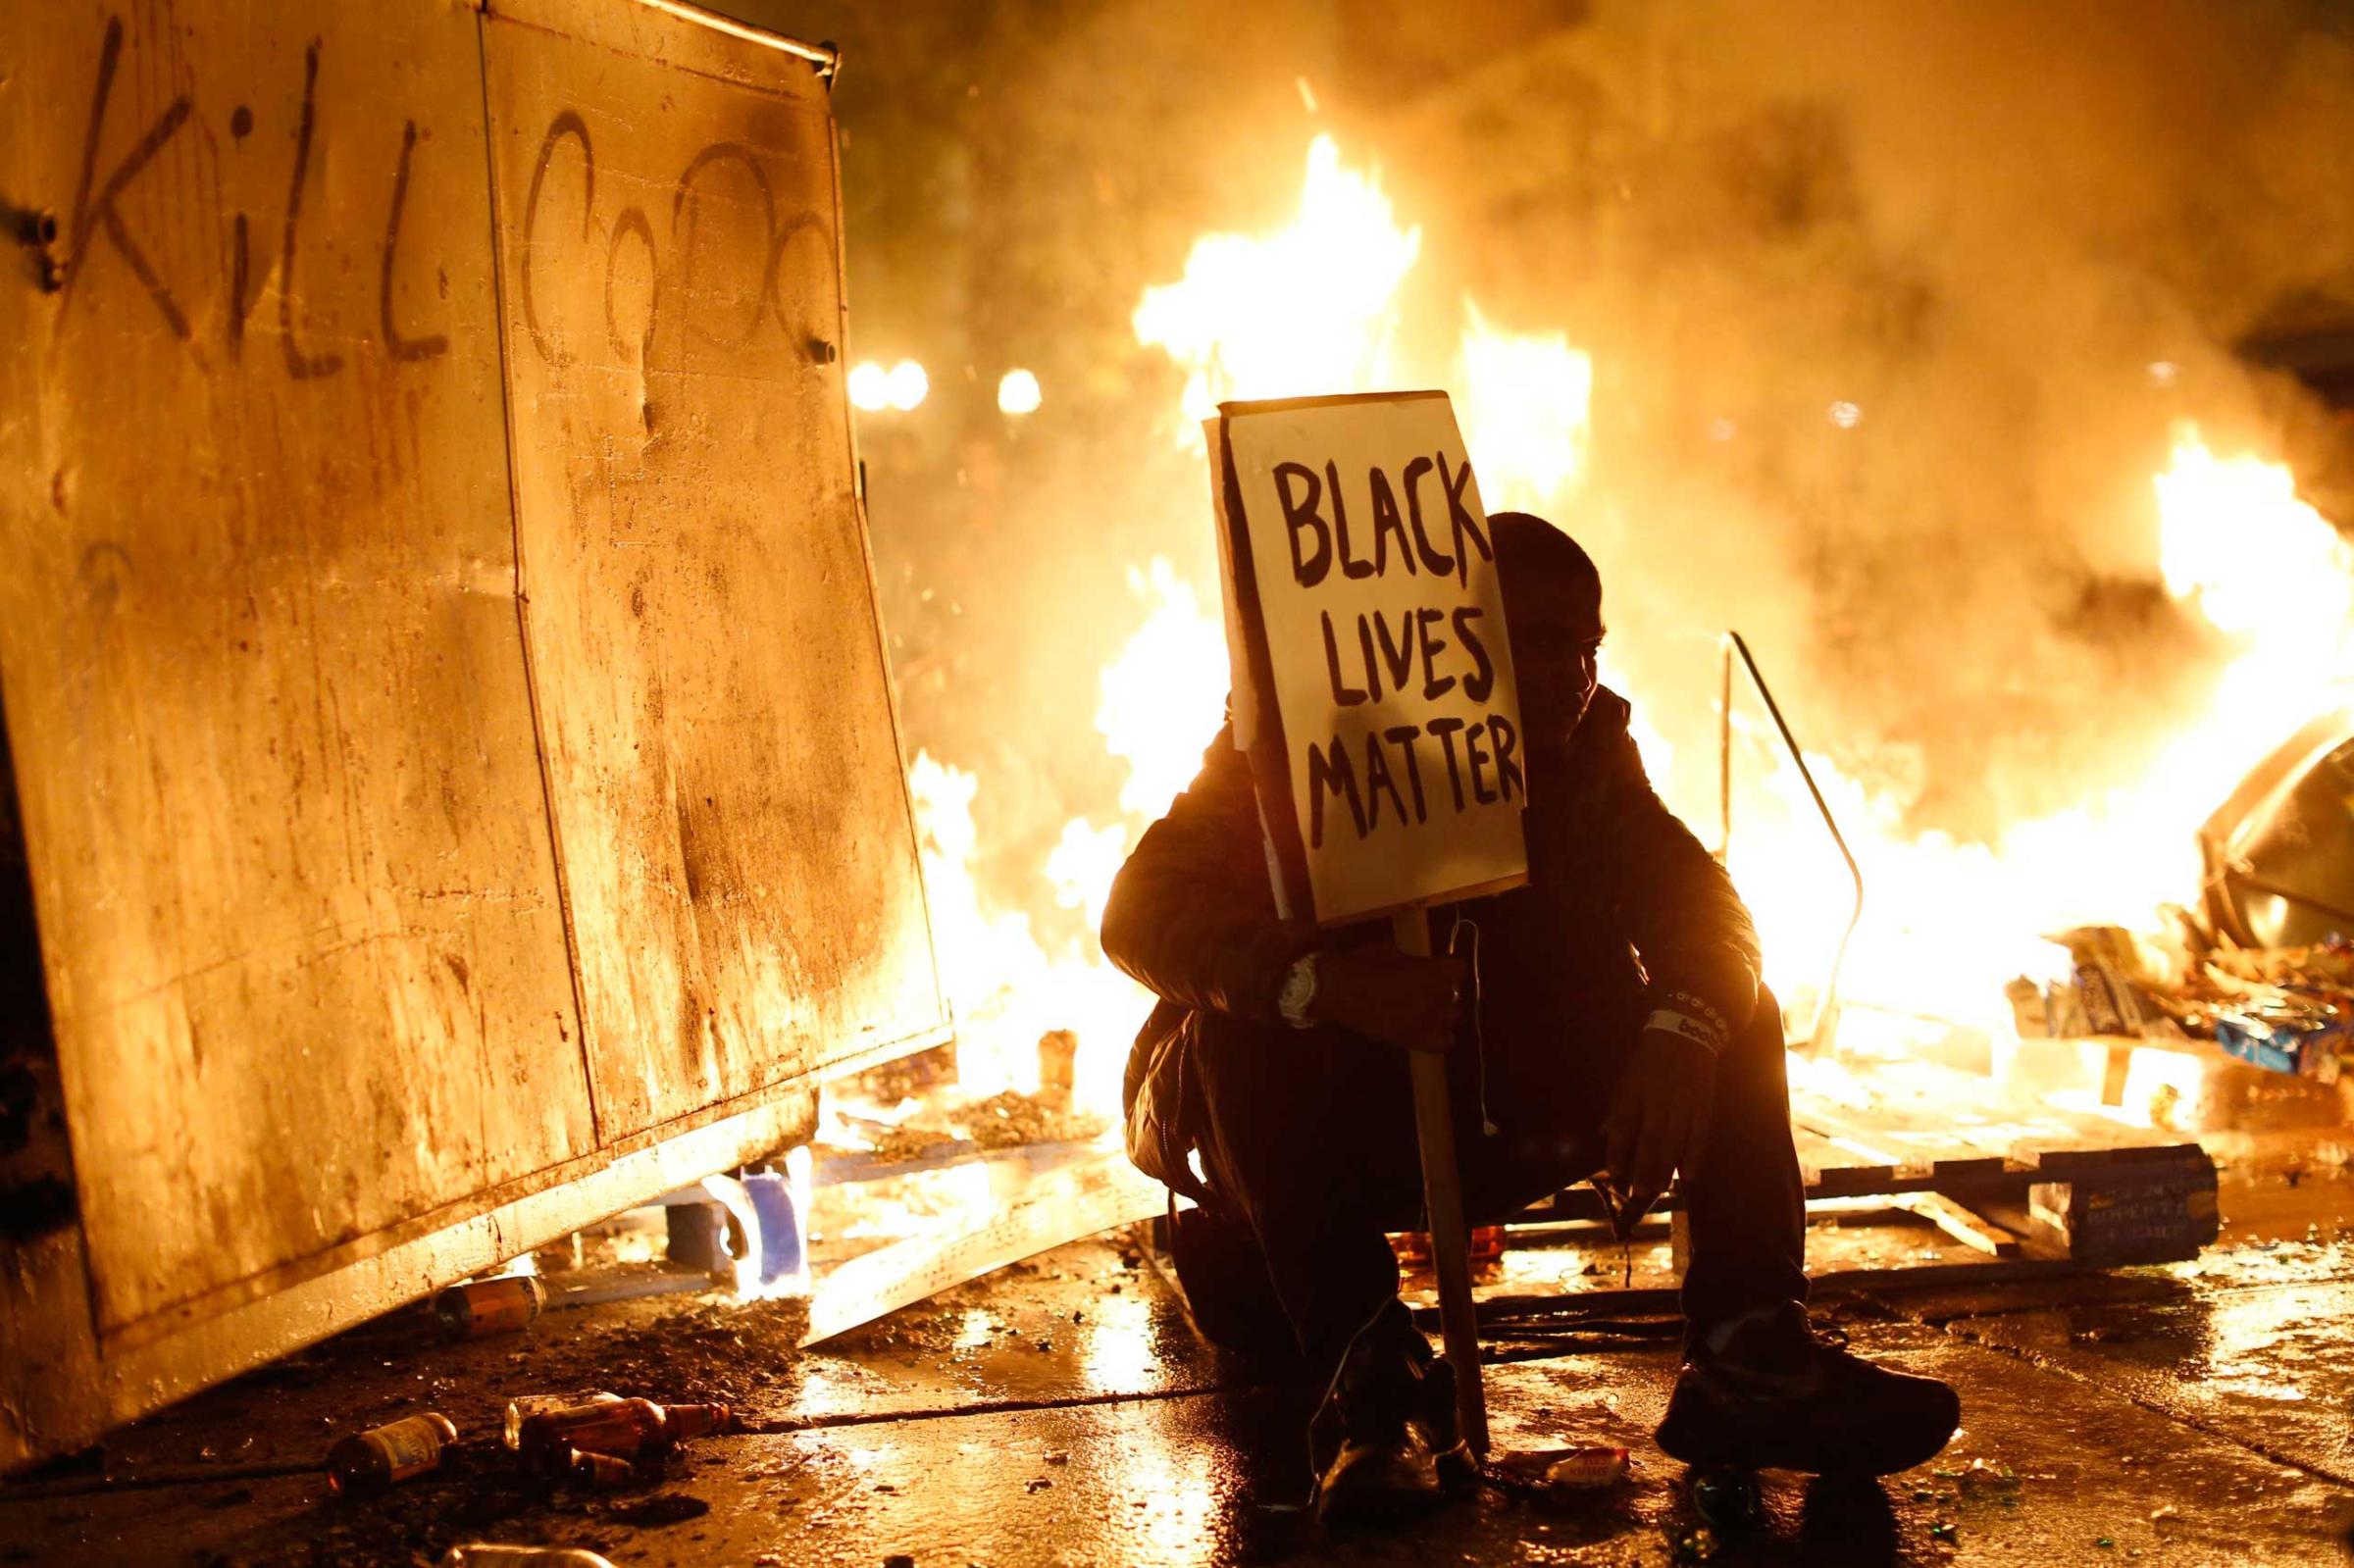 during a demonstration in Oakland, California following the grand jury decision in the shooting of Michael Brown in Ferguson, Missouri